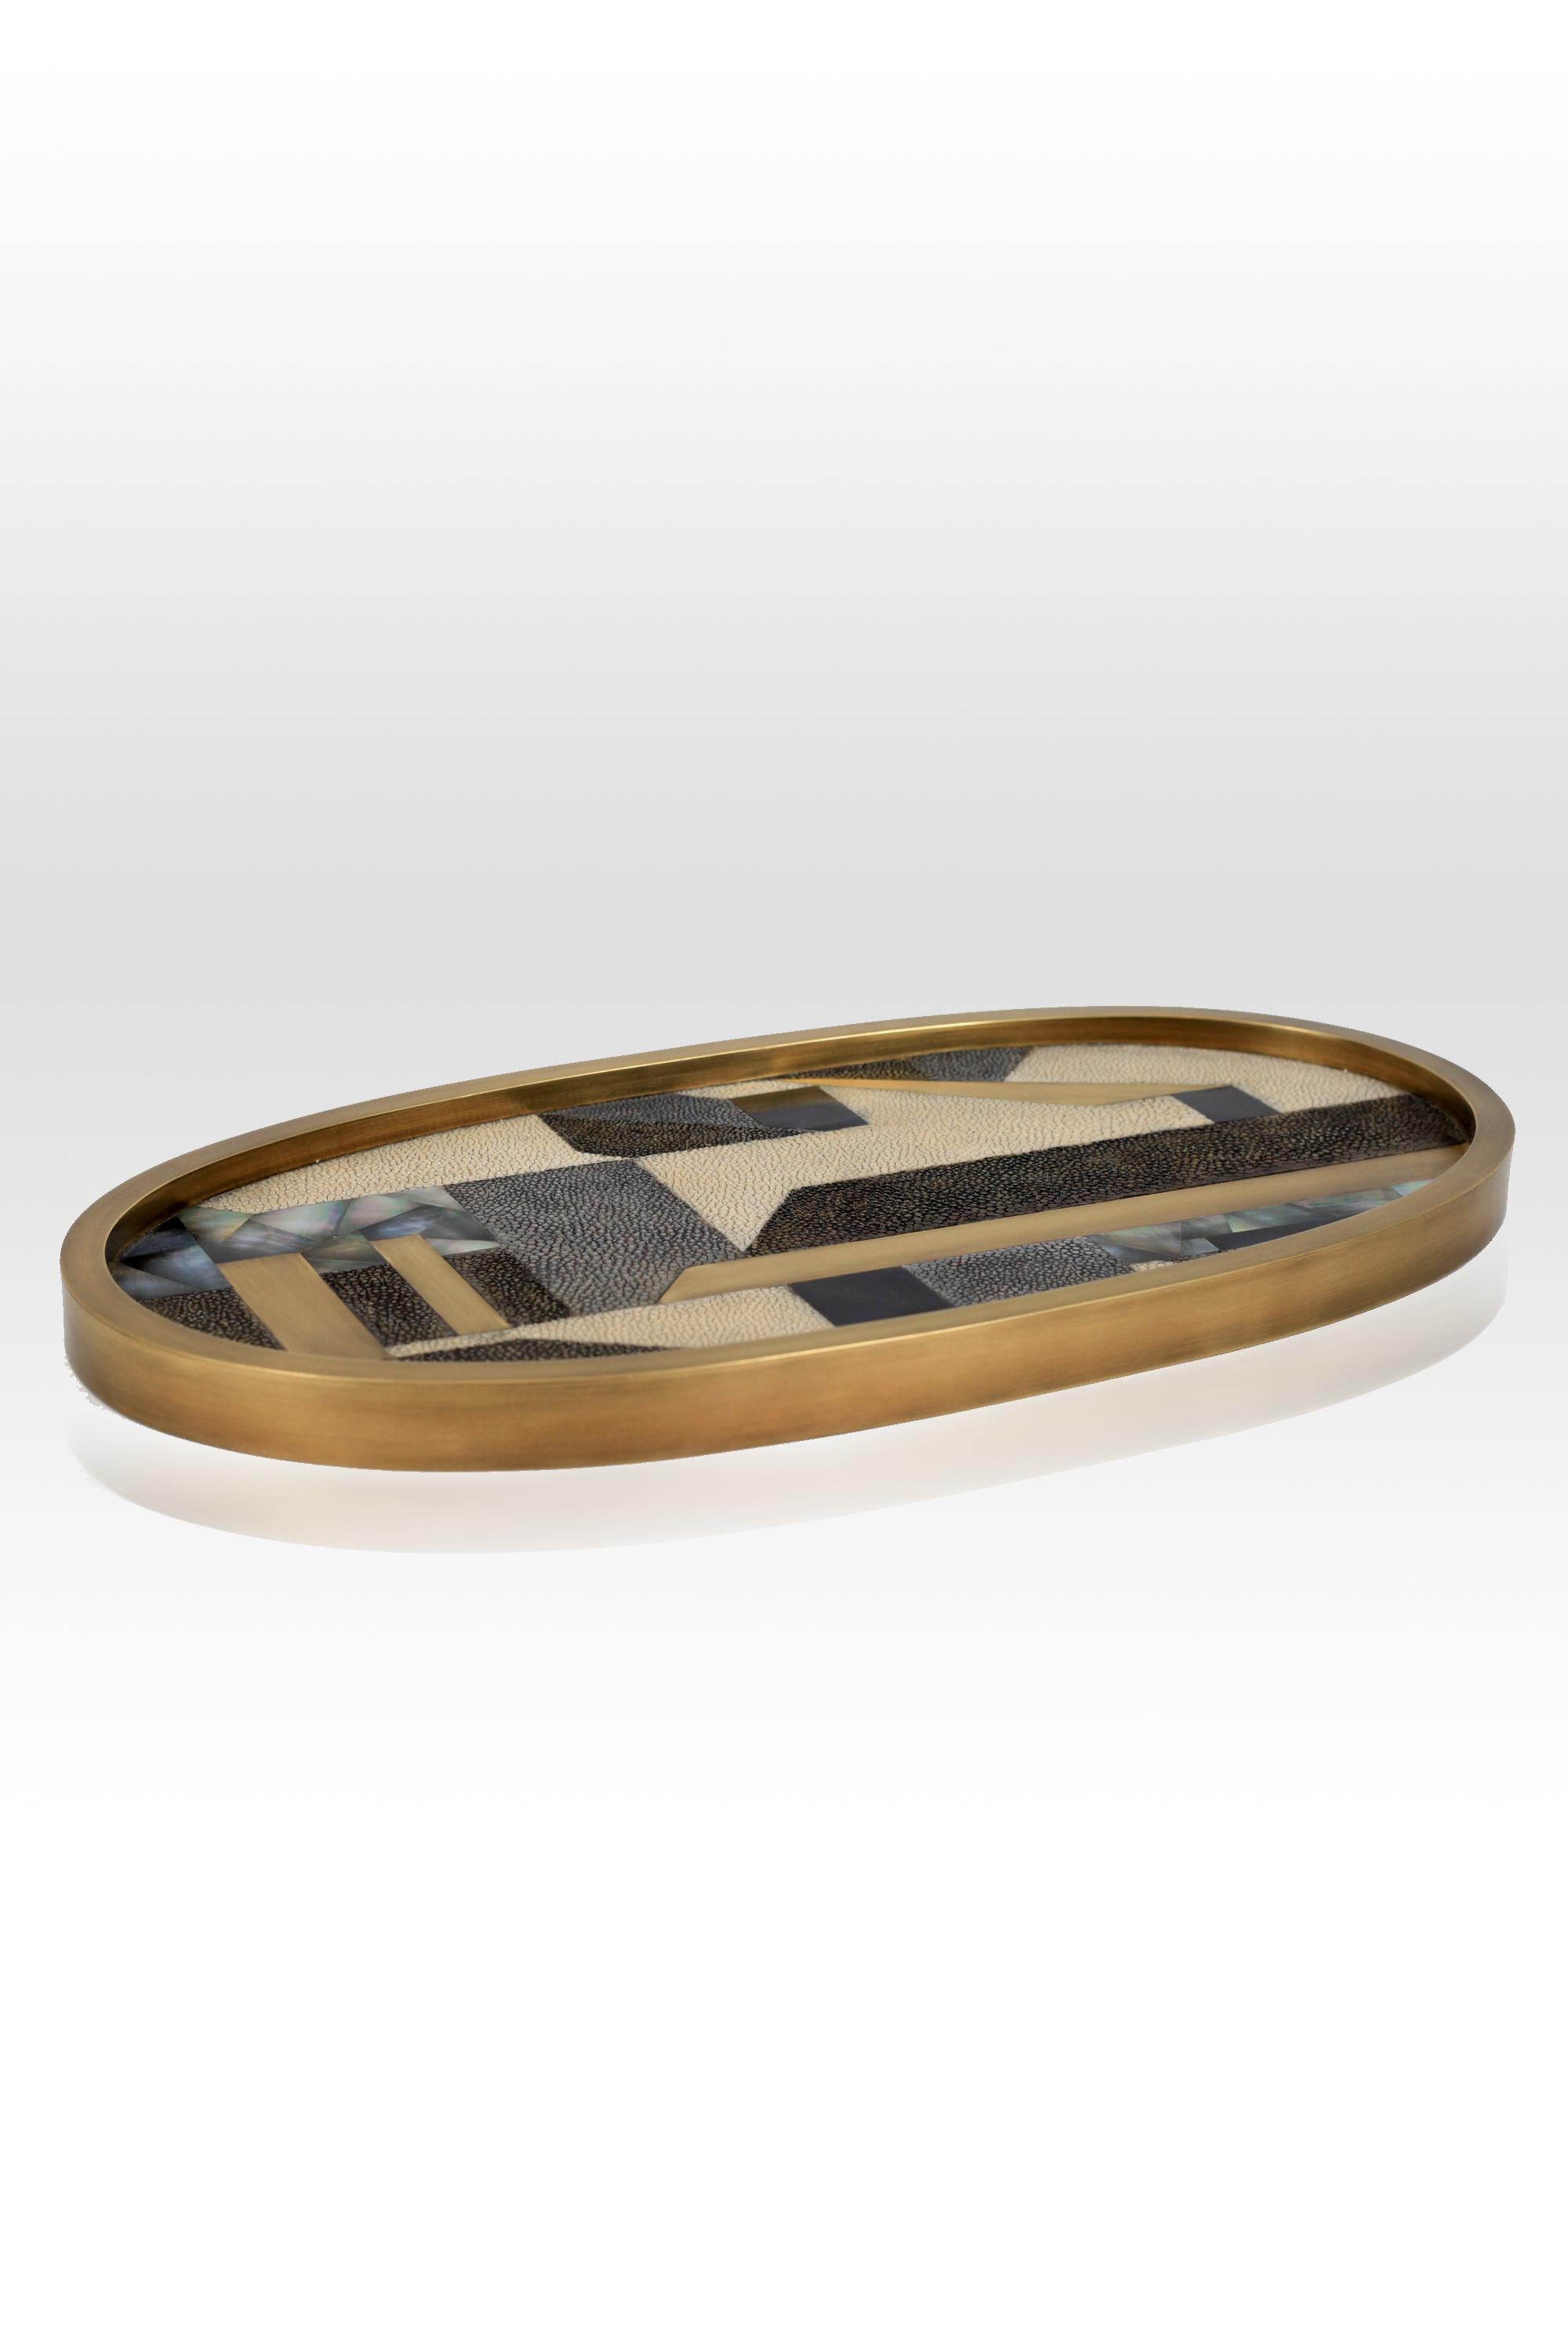 Oval Tray inlaid in Blue Shell and Brass by Kifu, Paris 11